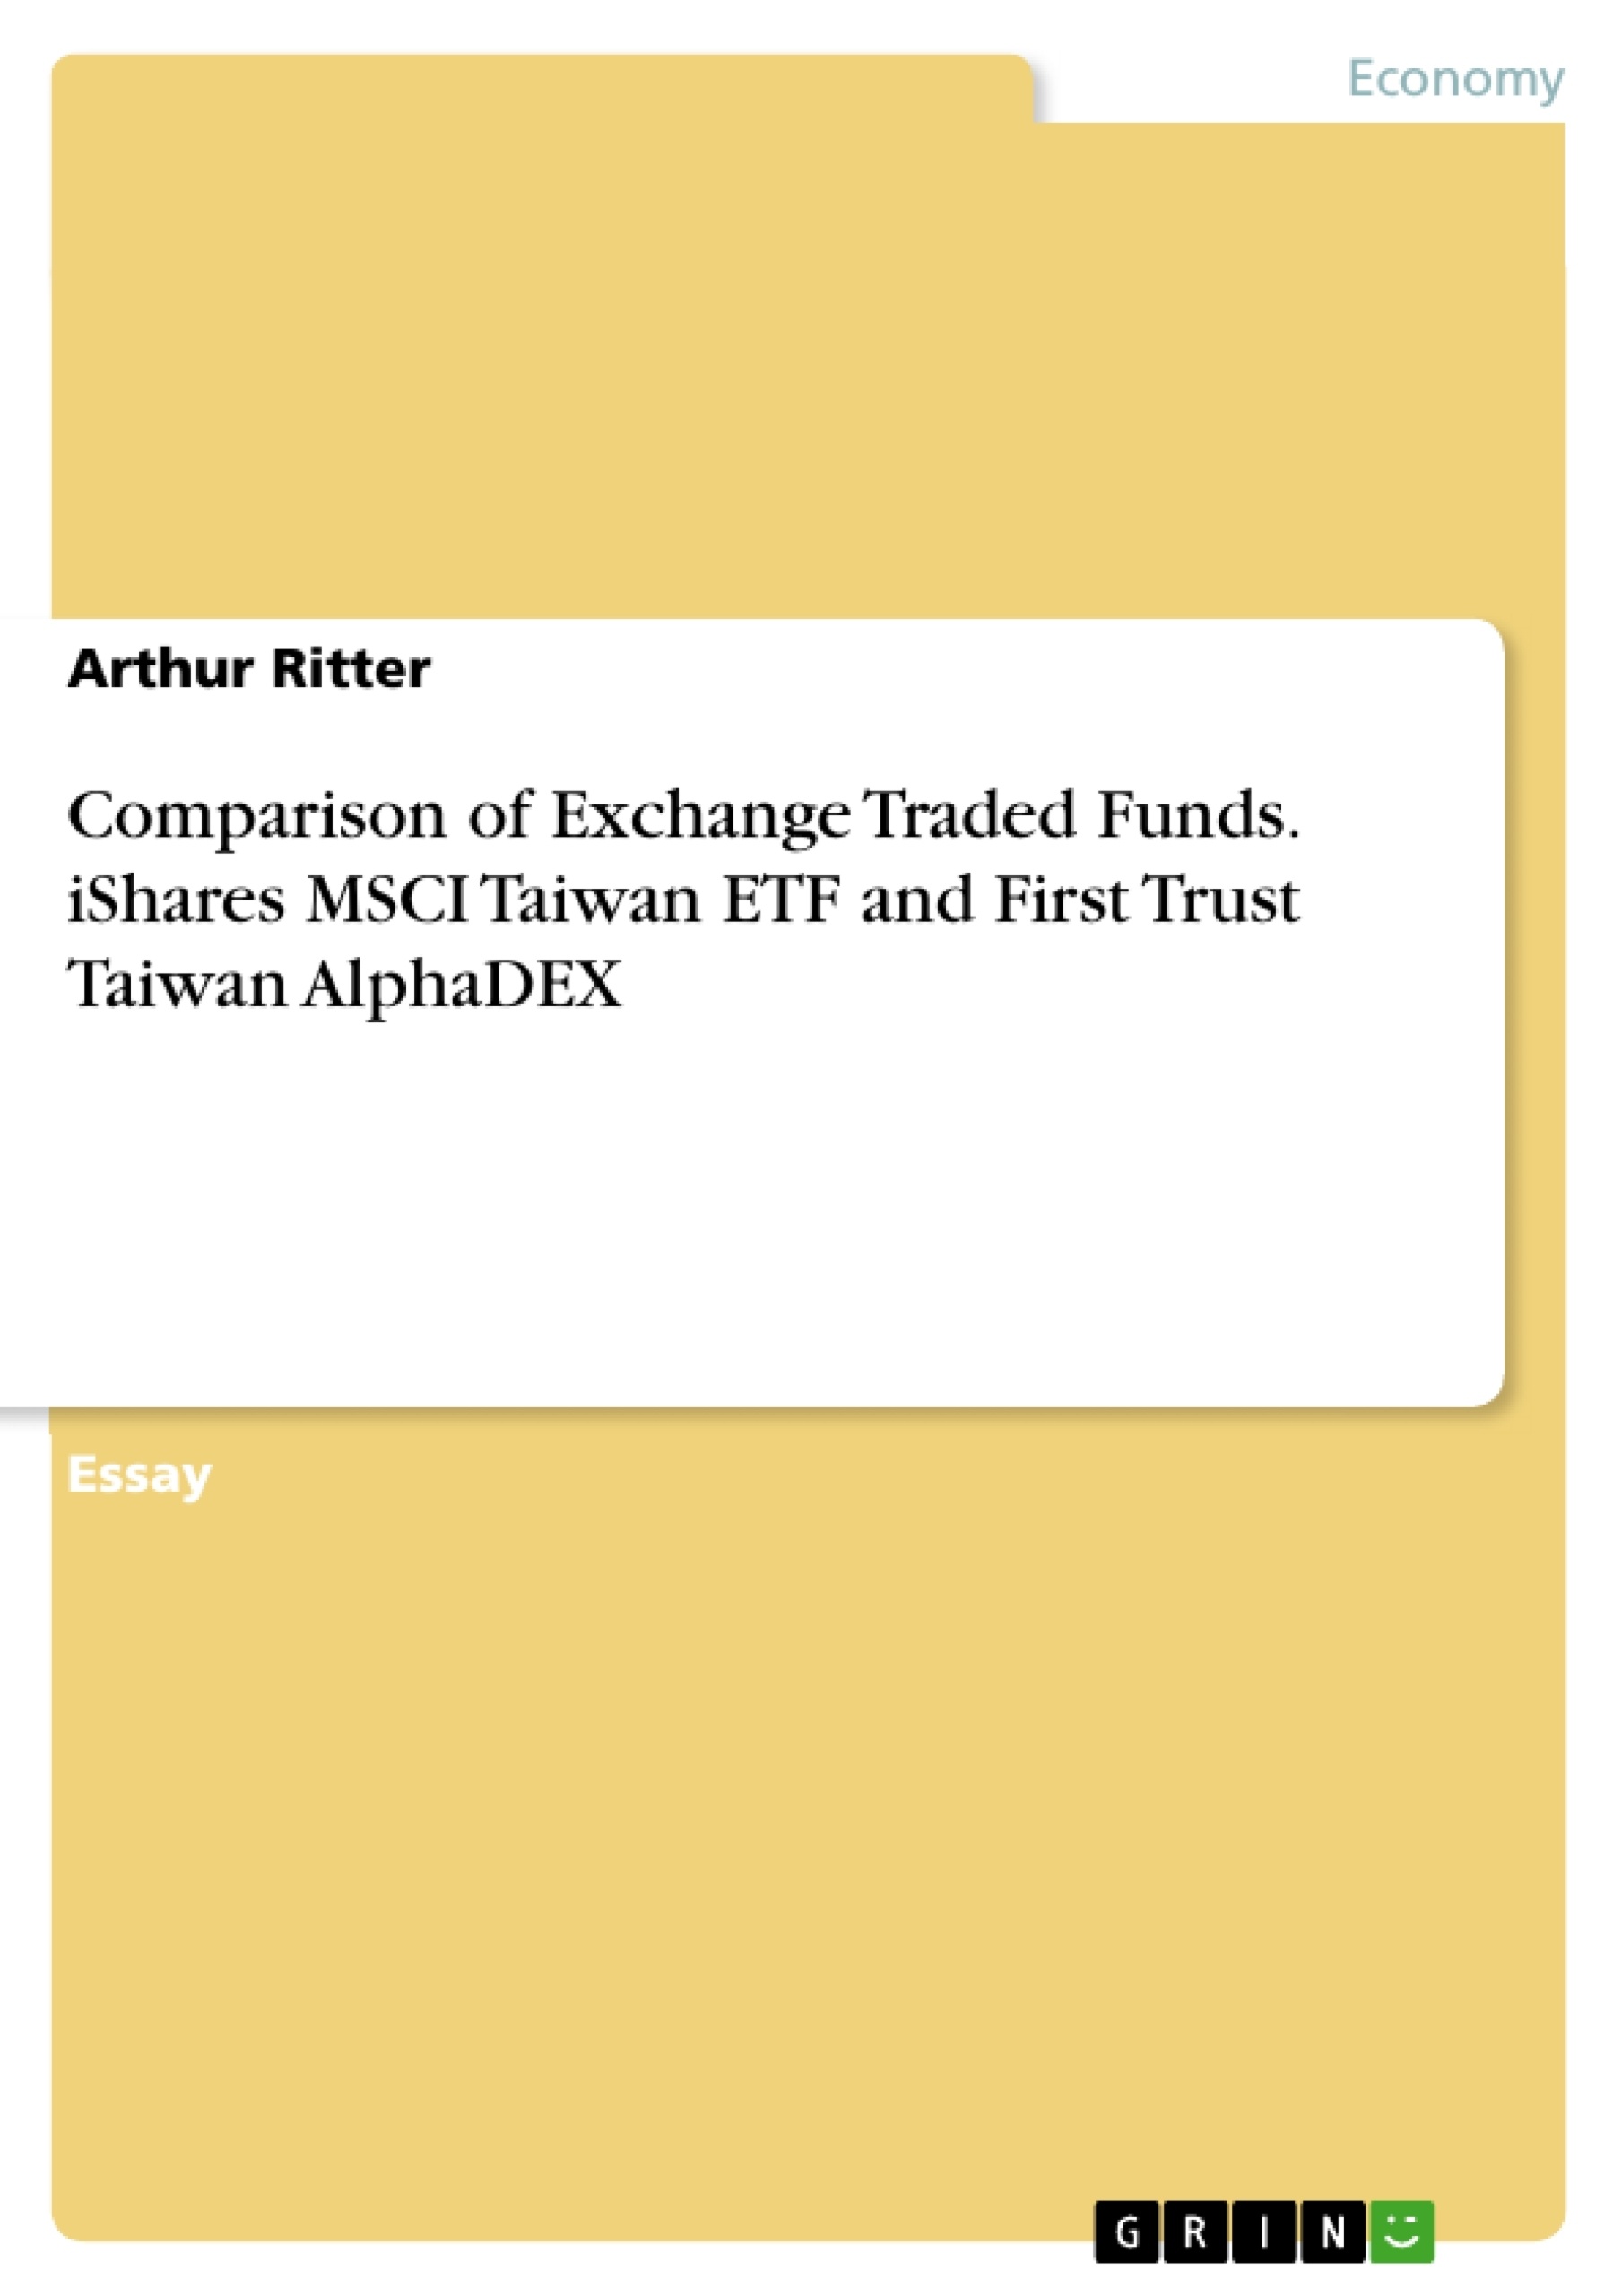 Title: Comparison of Exchange Traded Funds. iShares MSCI Taiwan ETF and First Trust Taiwan AlphaDEX